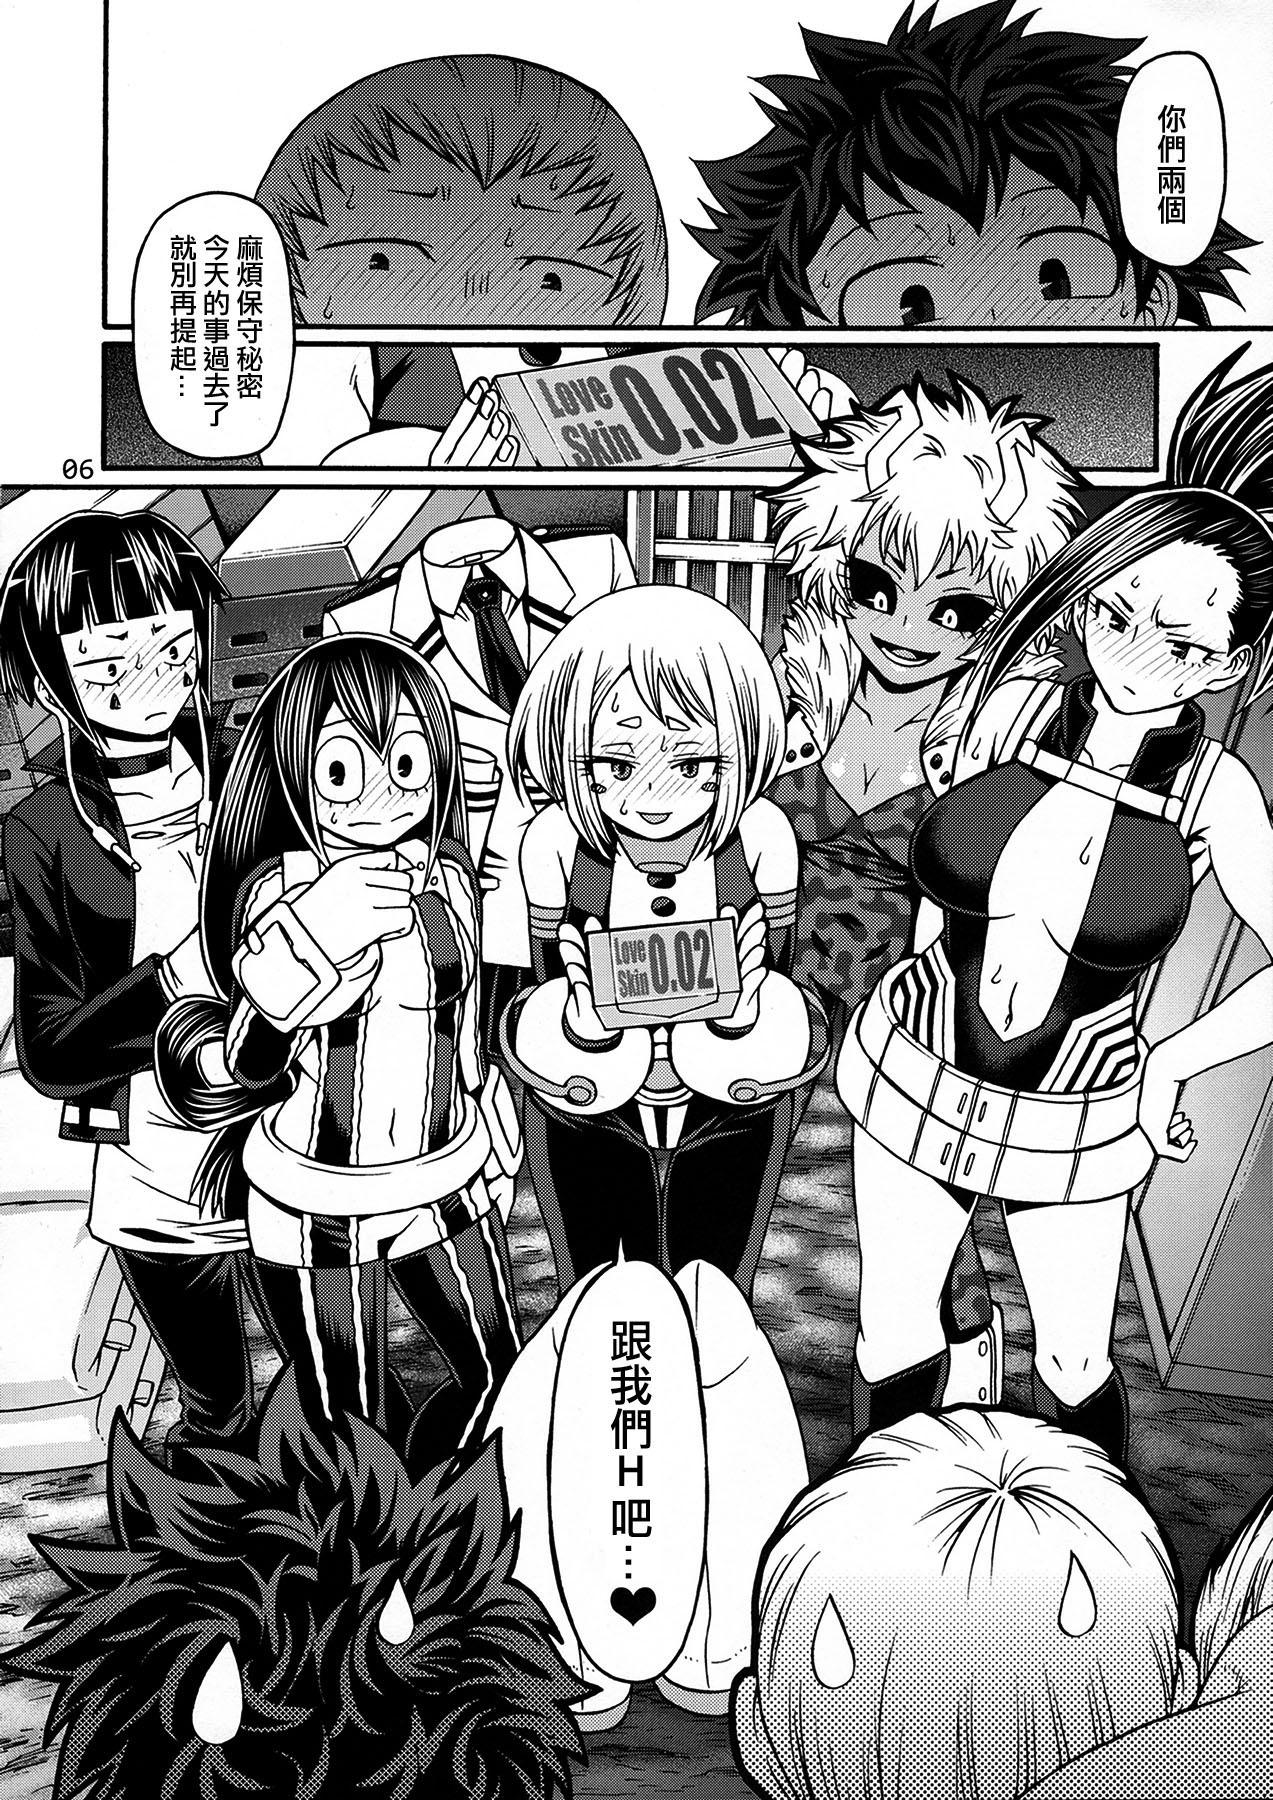 Cheat POPPIN' GIRLS - My hero academia Cums - Page 5